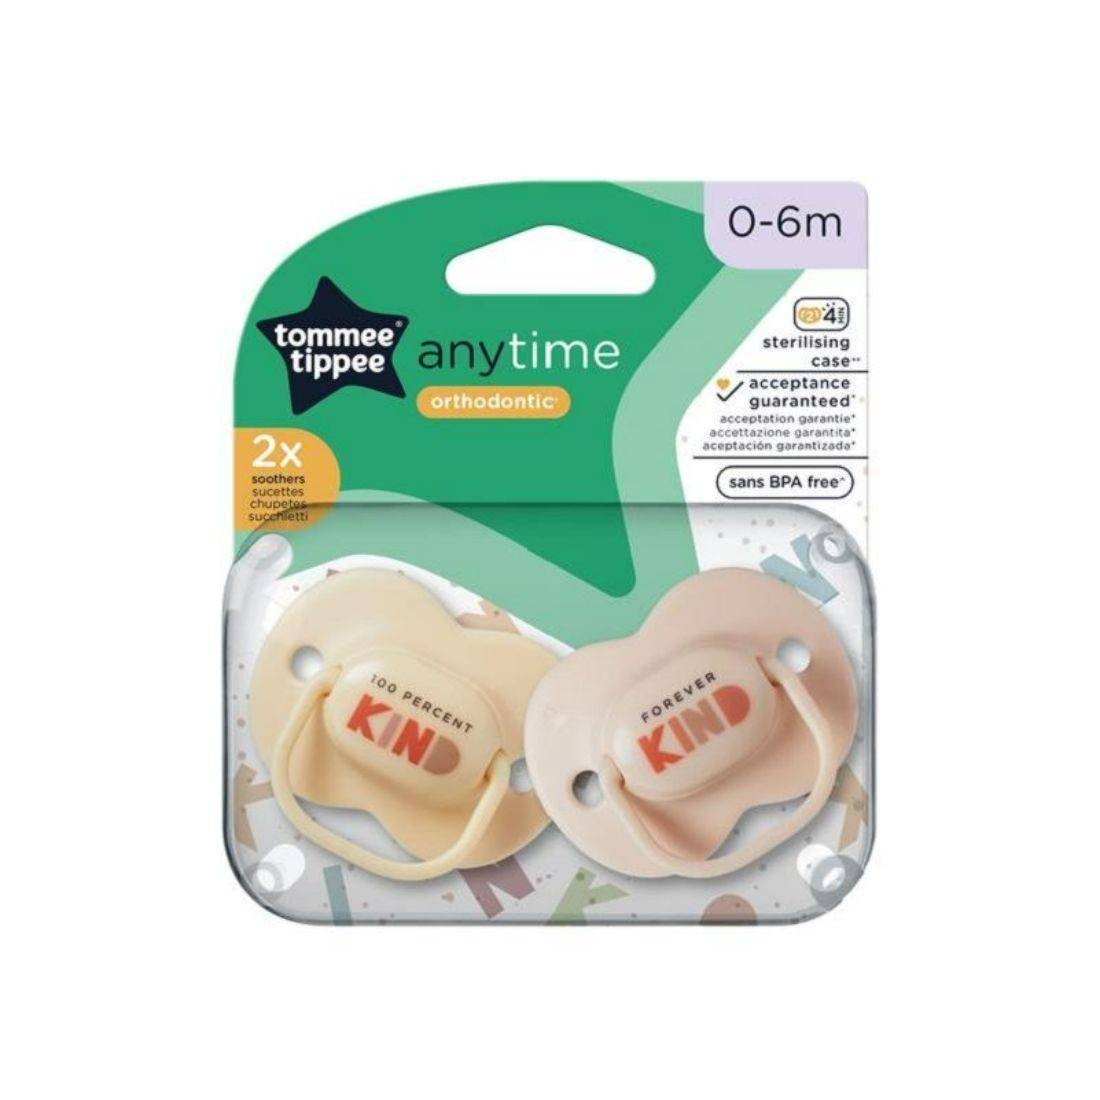 Tommee Tippee Anytime Orthodontic Soother 0-6 Months (Pack of 2) - Miazone